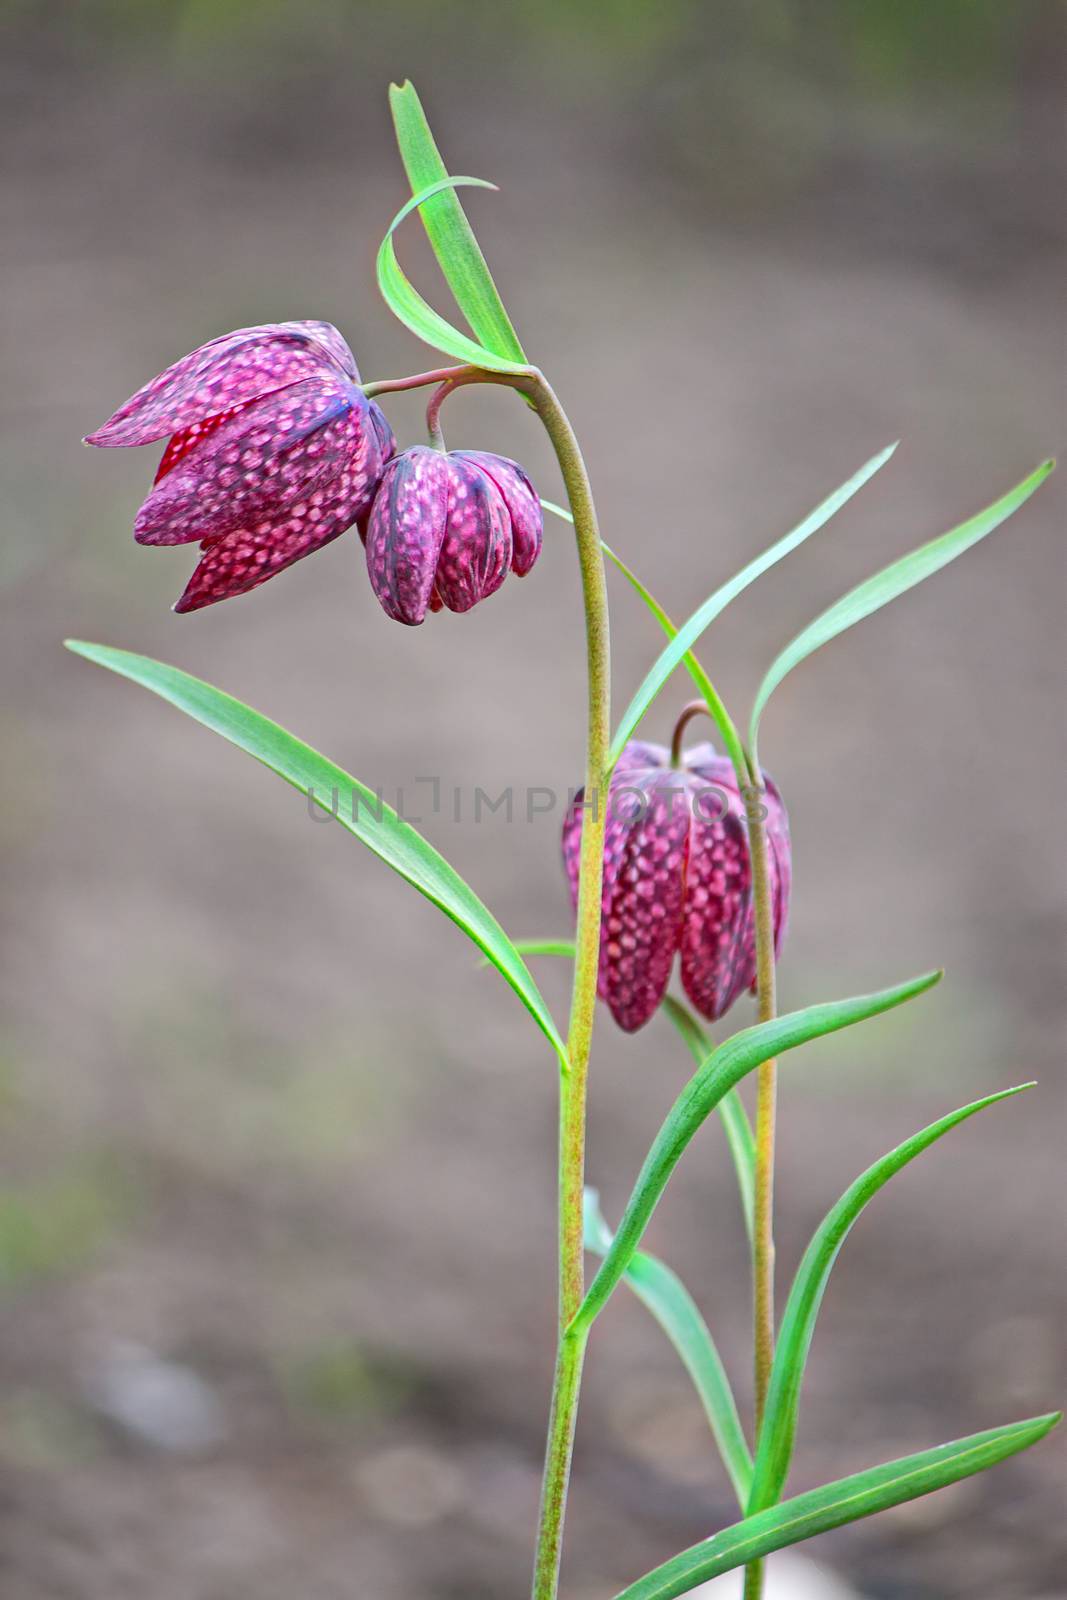 Fritillaria meleagris flowers closeup. Image with shallow depth of field.